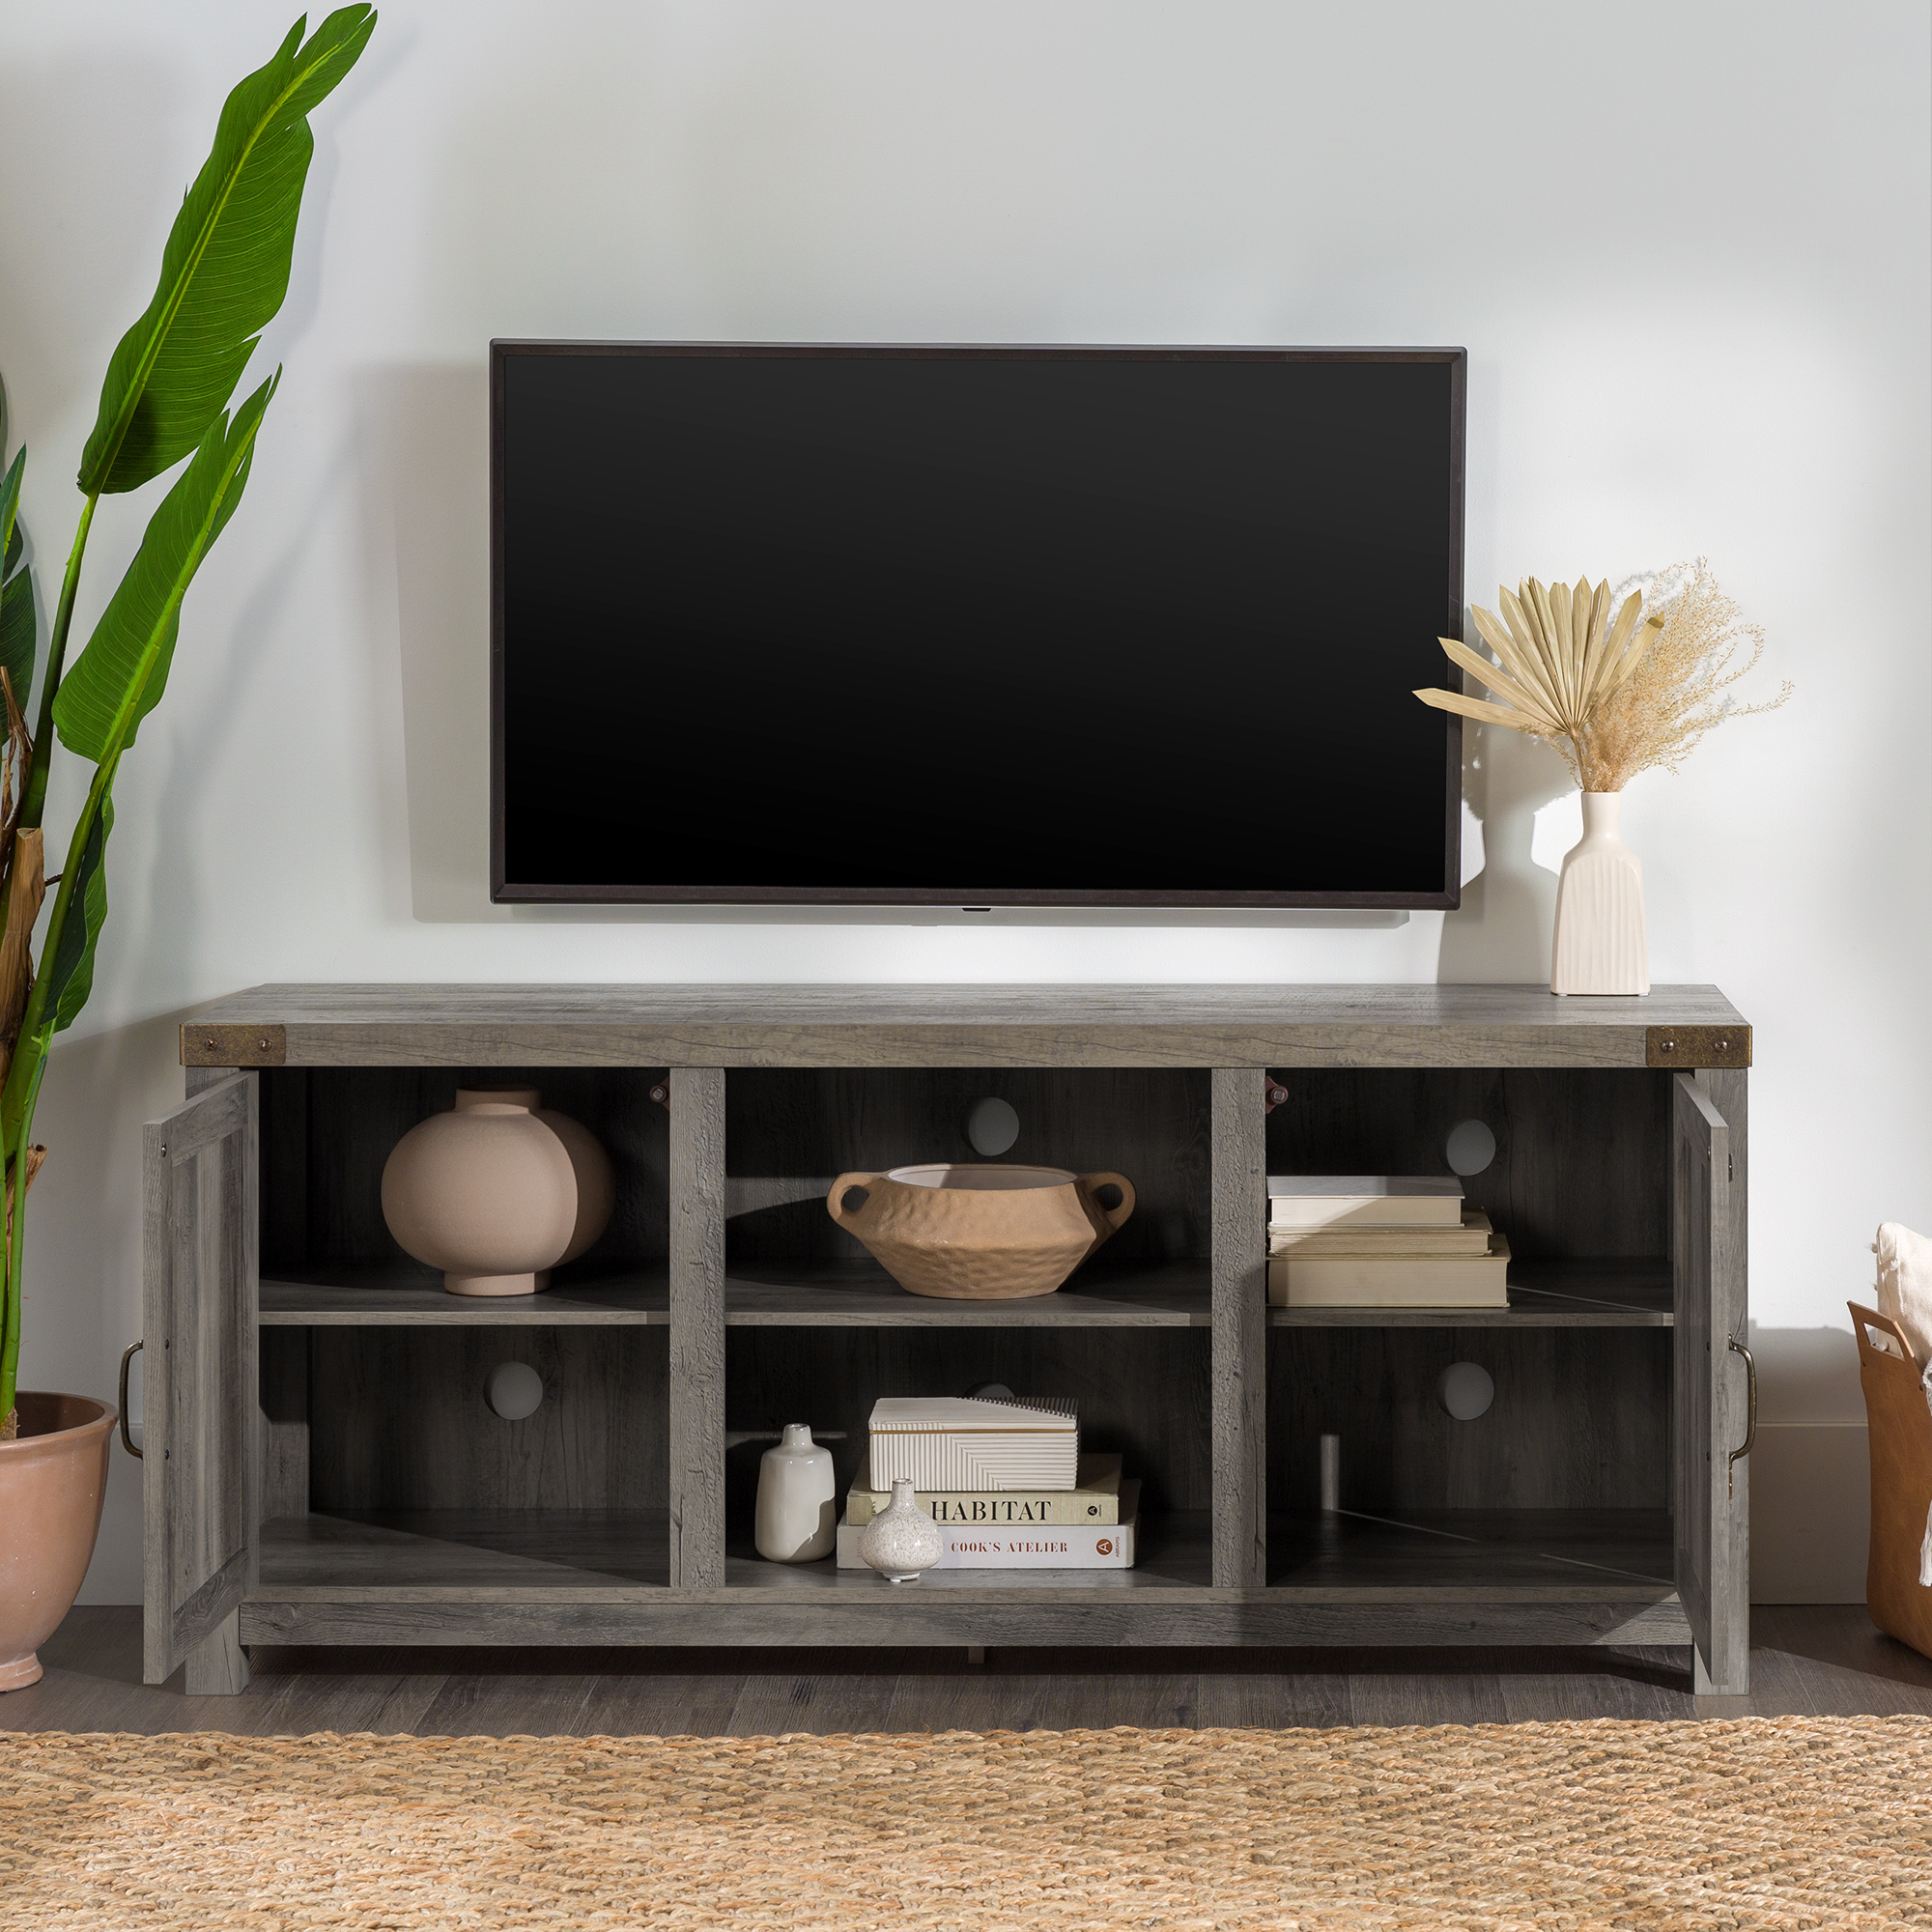 Walker Edison Modern Farmhouse Barn Door TV Stand for TVs up to 65", Grey Wash - image 5 of 22